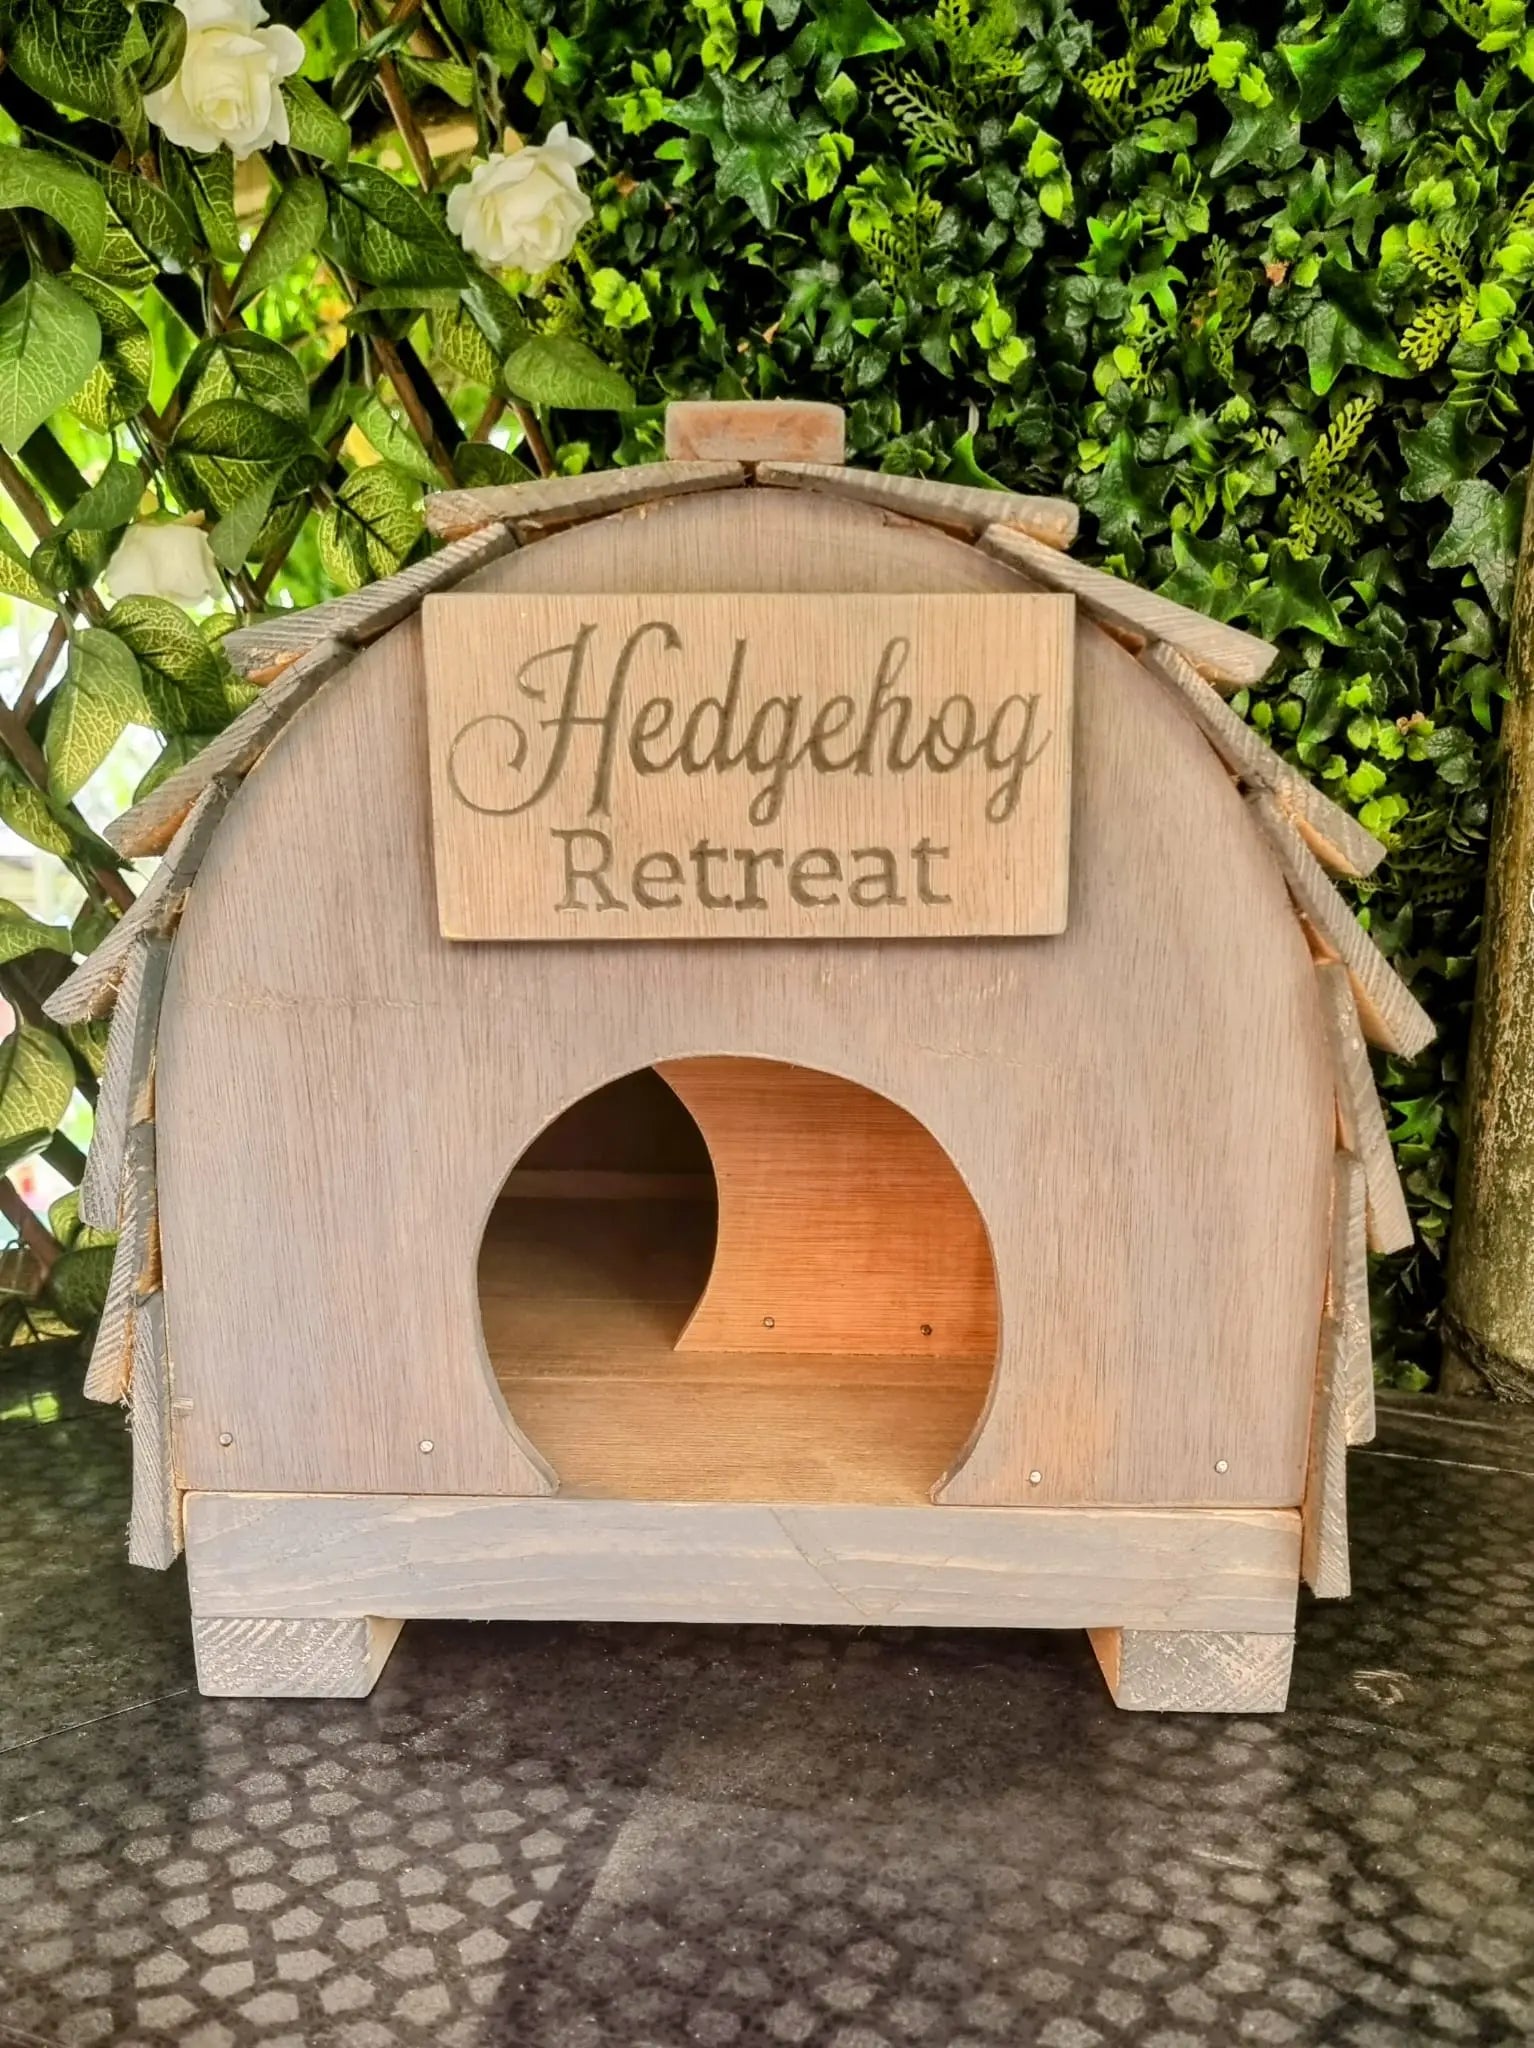 Welcome to the Ultimate Hedgehog Retreat wisteria woodcraft, wooden decor